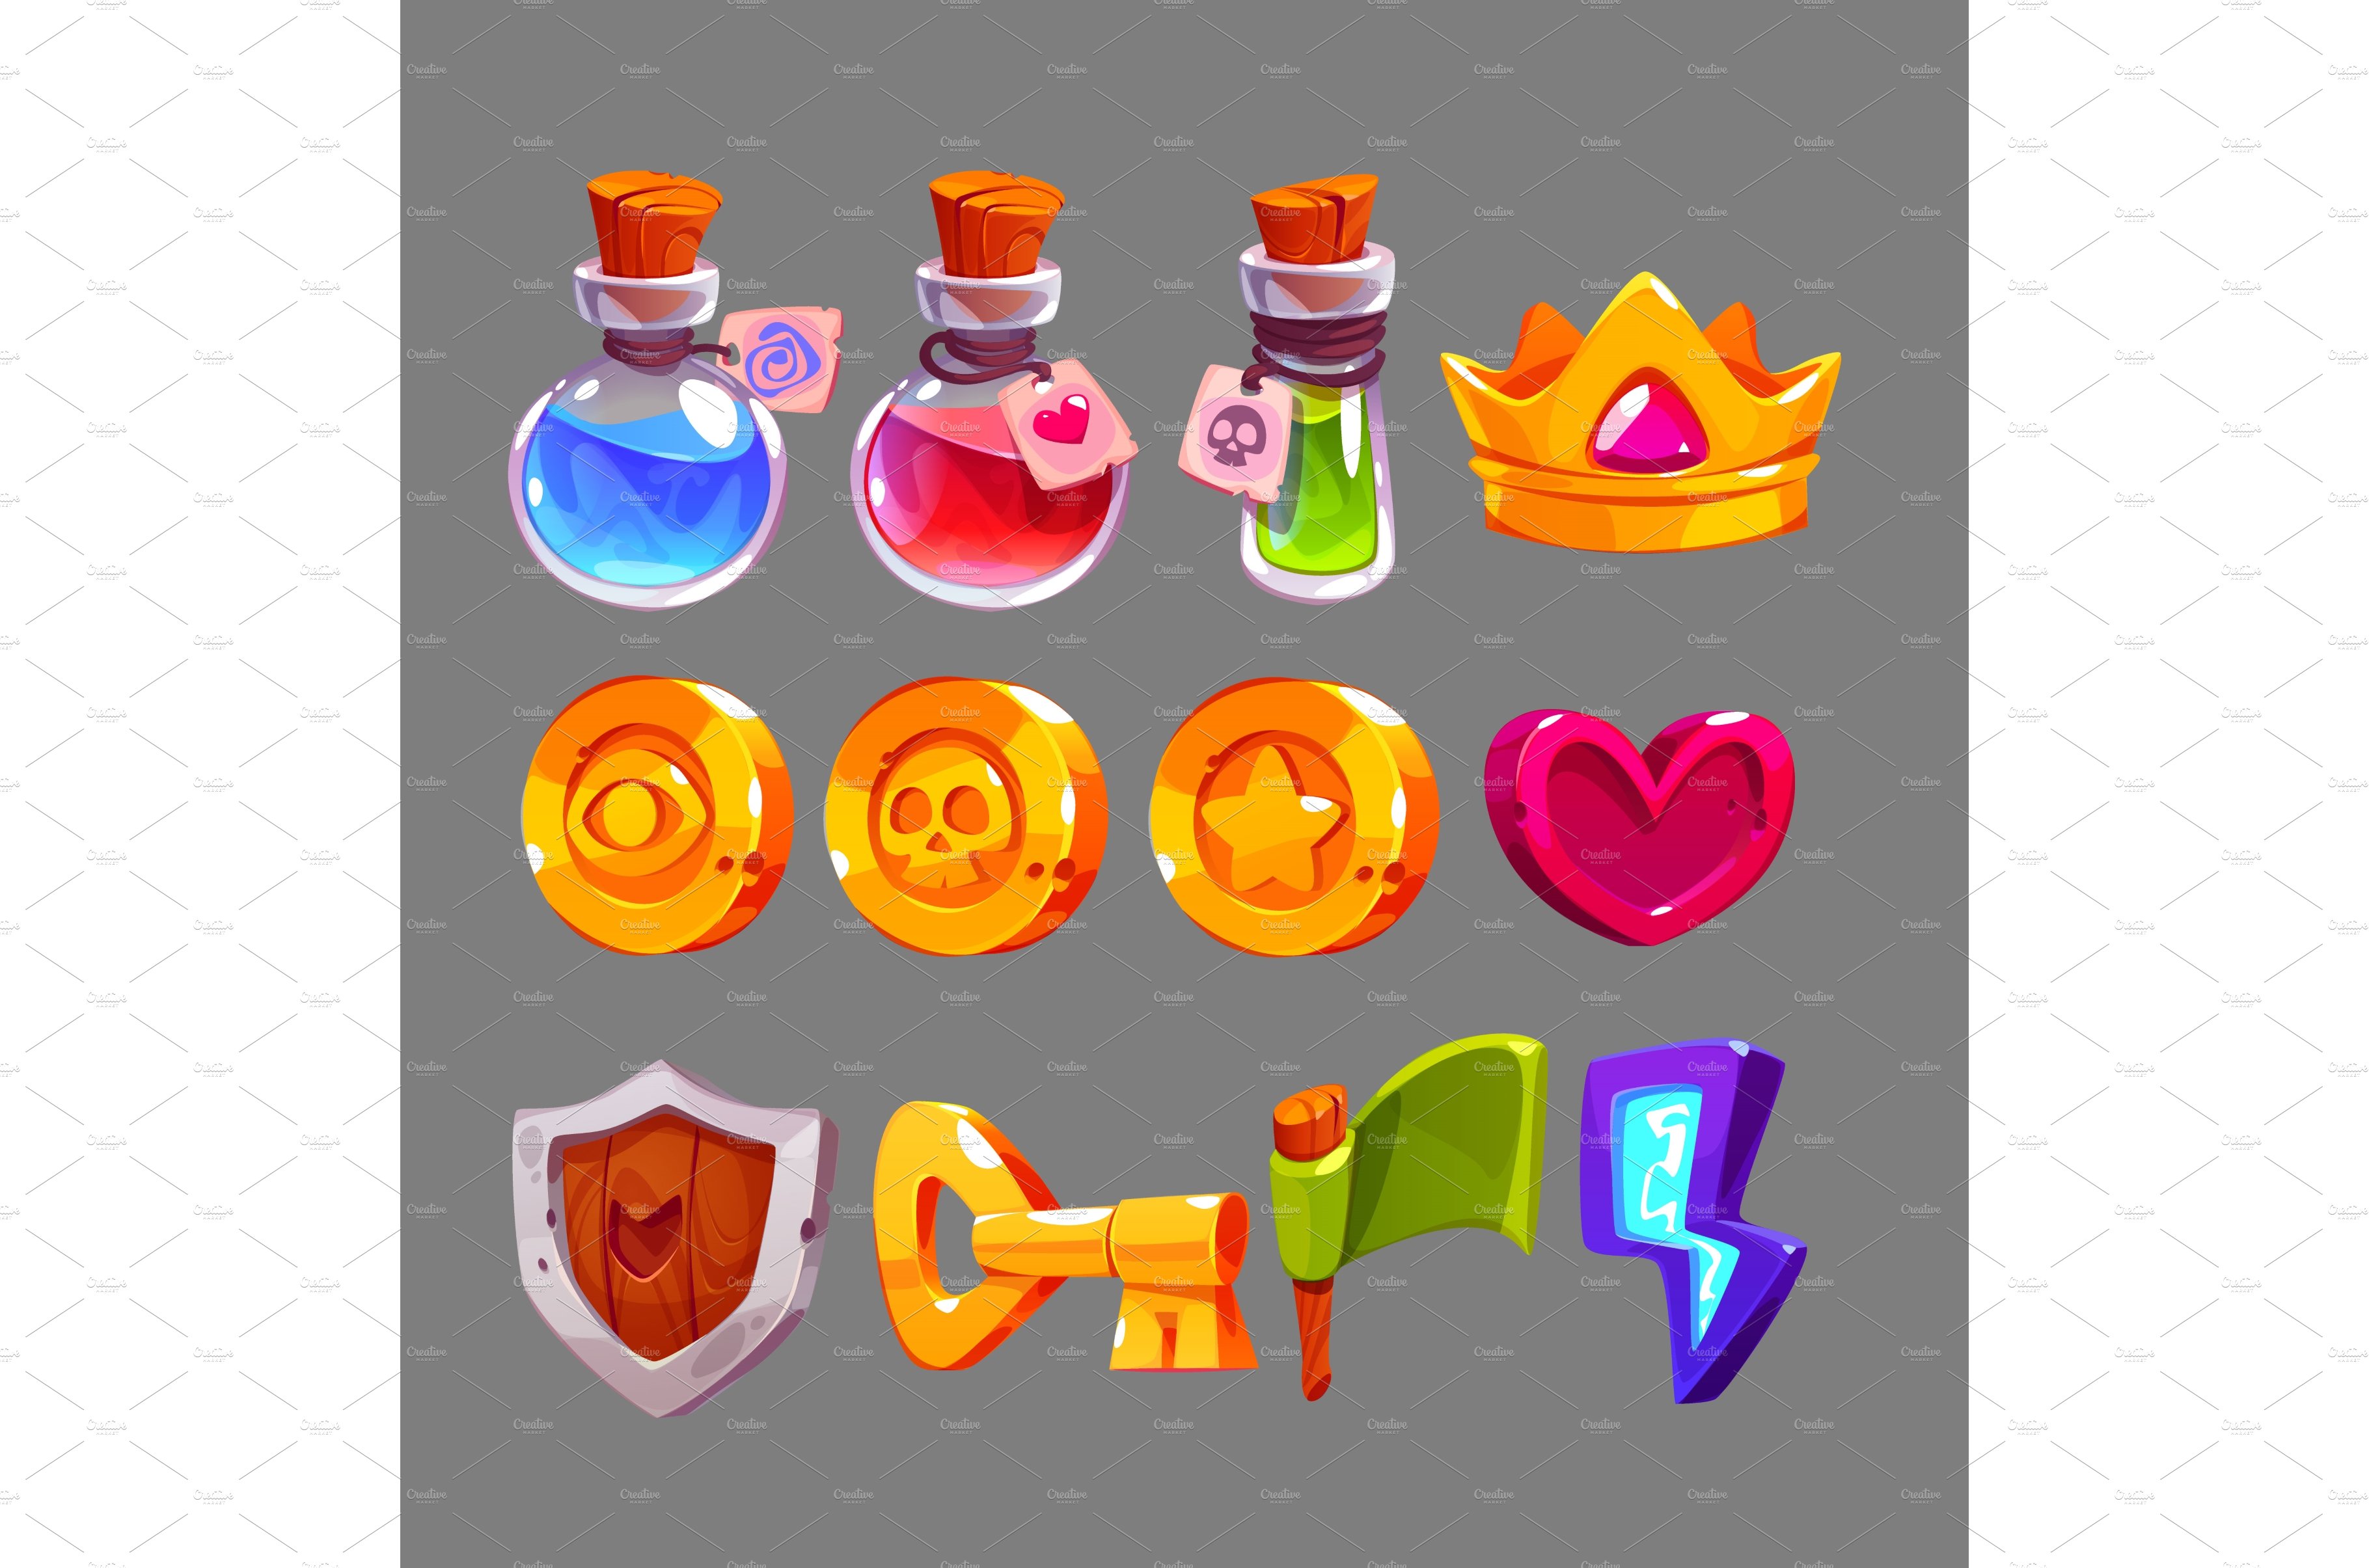 Game icons with potions, gold crown cover image.